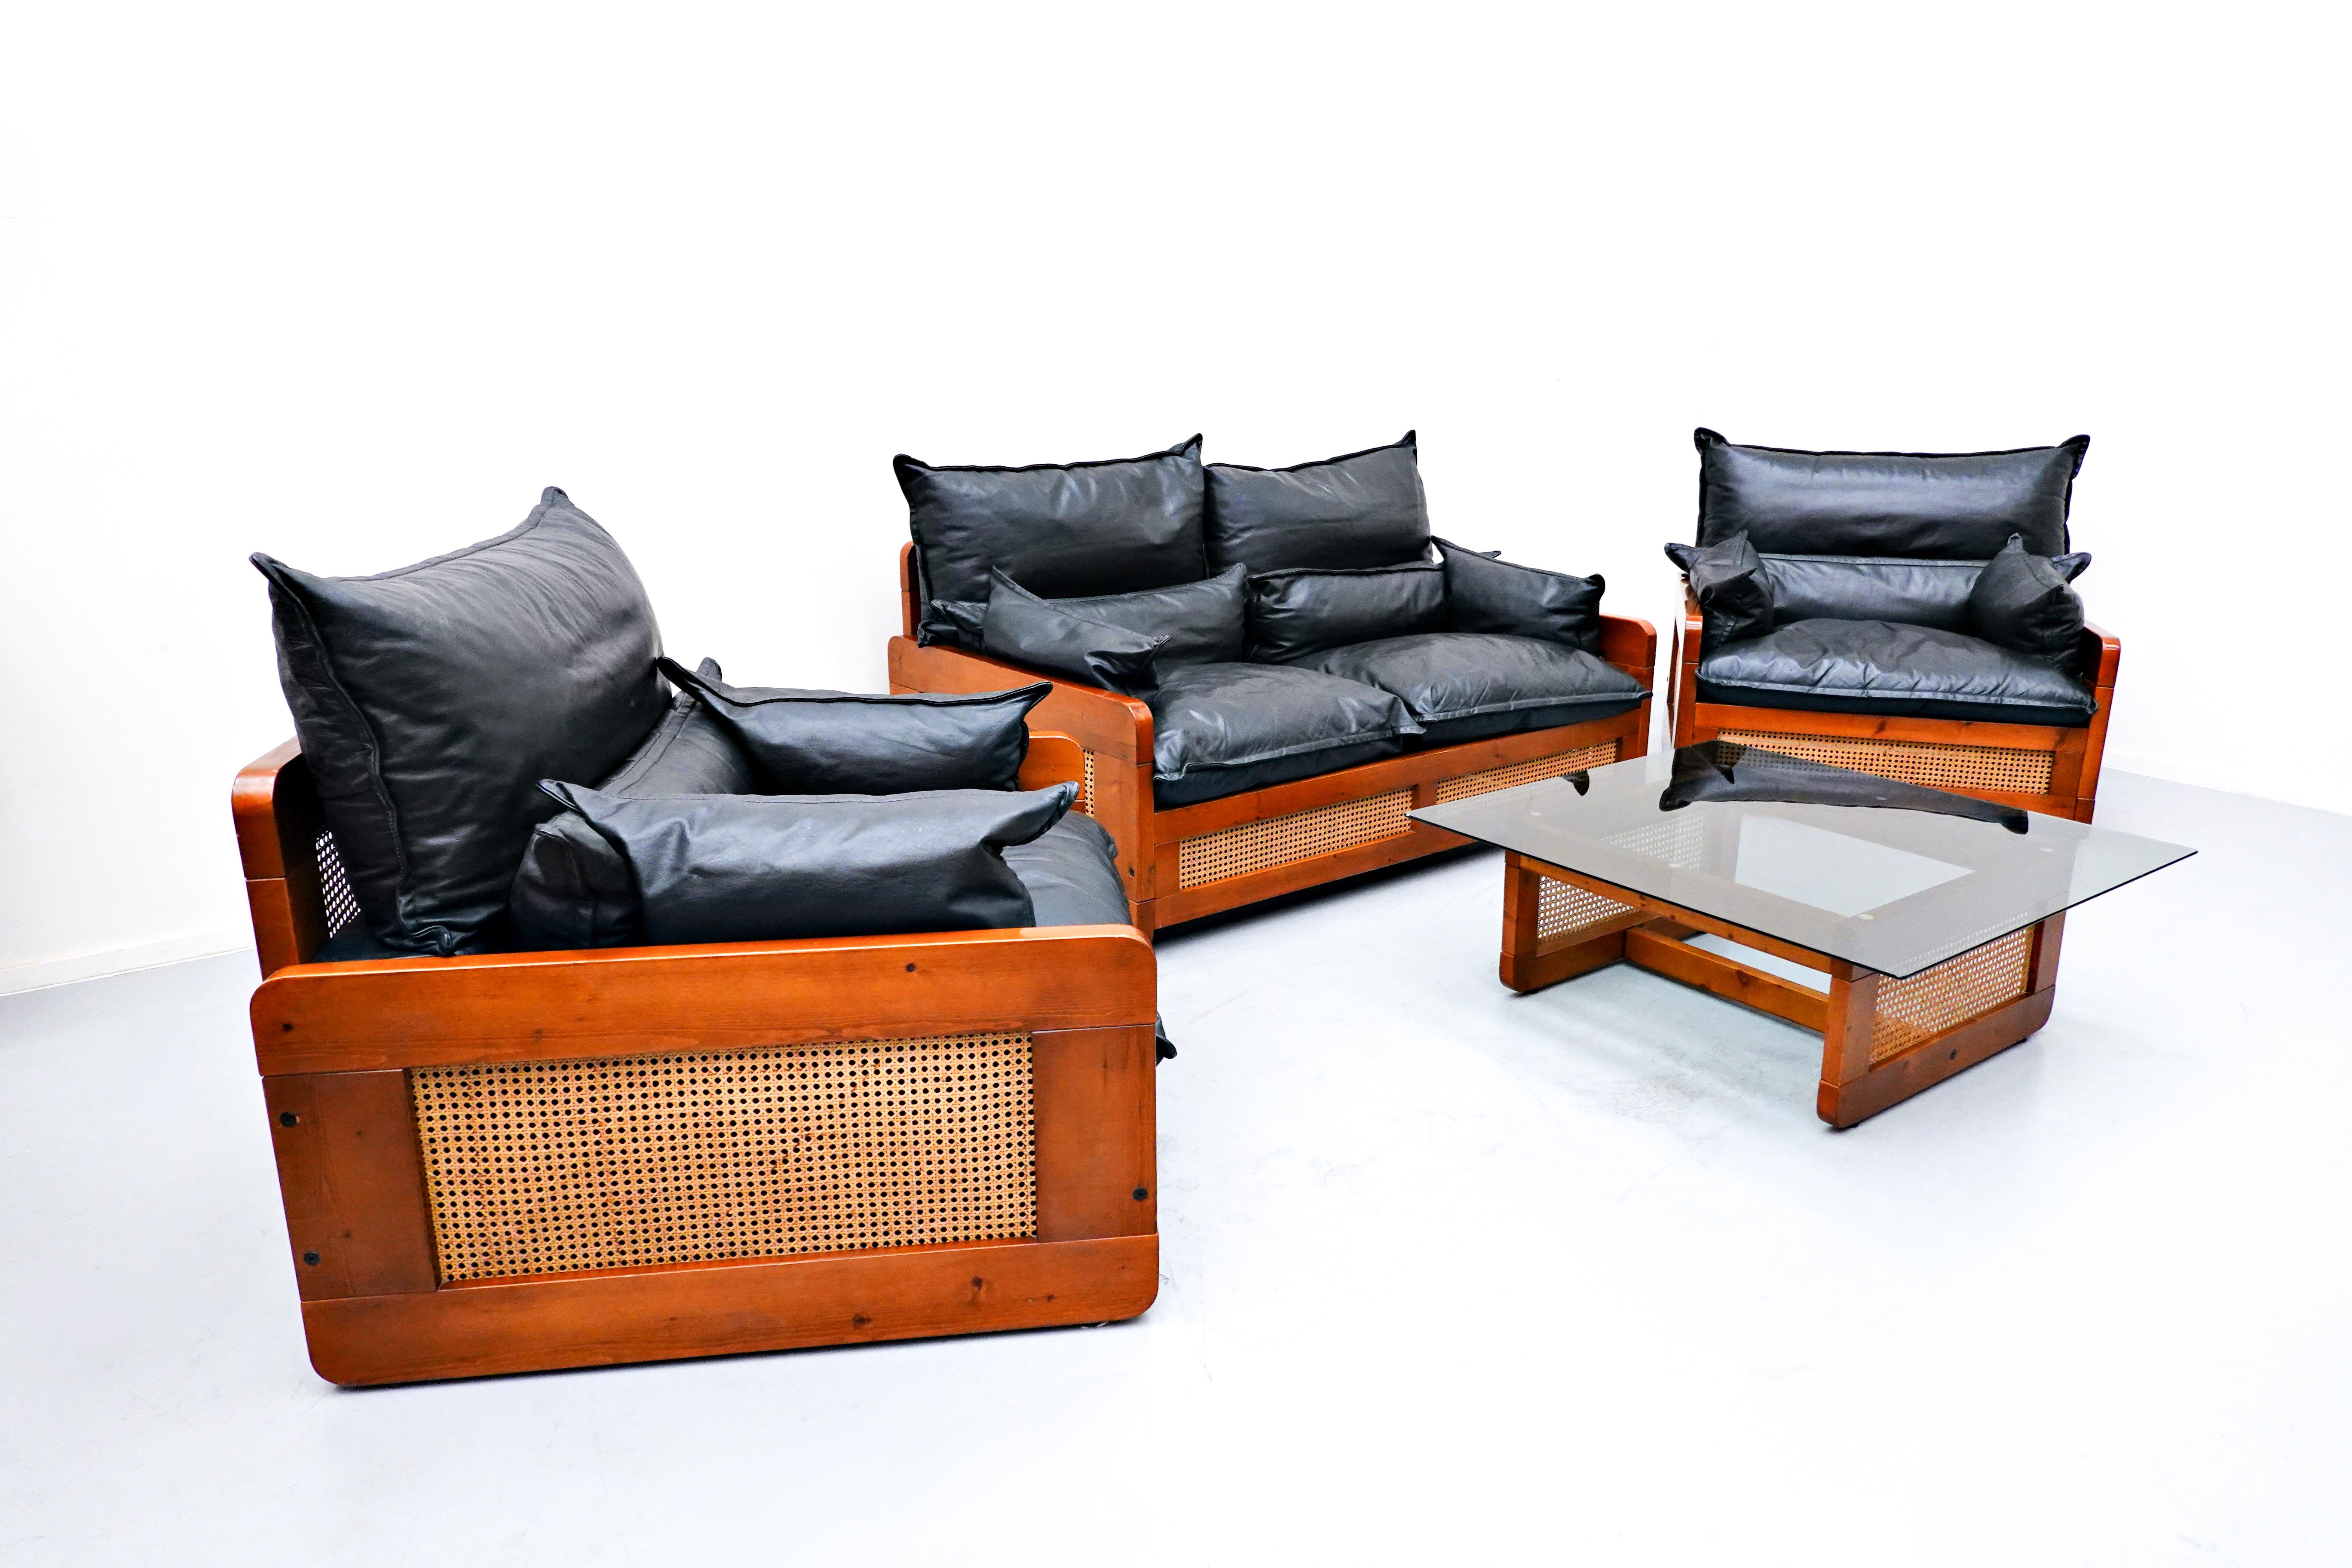 Italian Mid-Century Modern Black Leather Living Room Set, 1970s
European 
One sofa 
Two armchairs 
One table 
Dimensions: 1 place W 92.8cm, D 92cm, H 80, SH 40
2 place W 153, D92, H80, SH 40
Coffee table W 89.5, H 33.8.